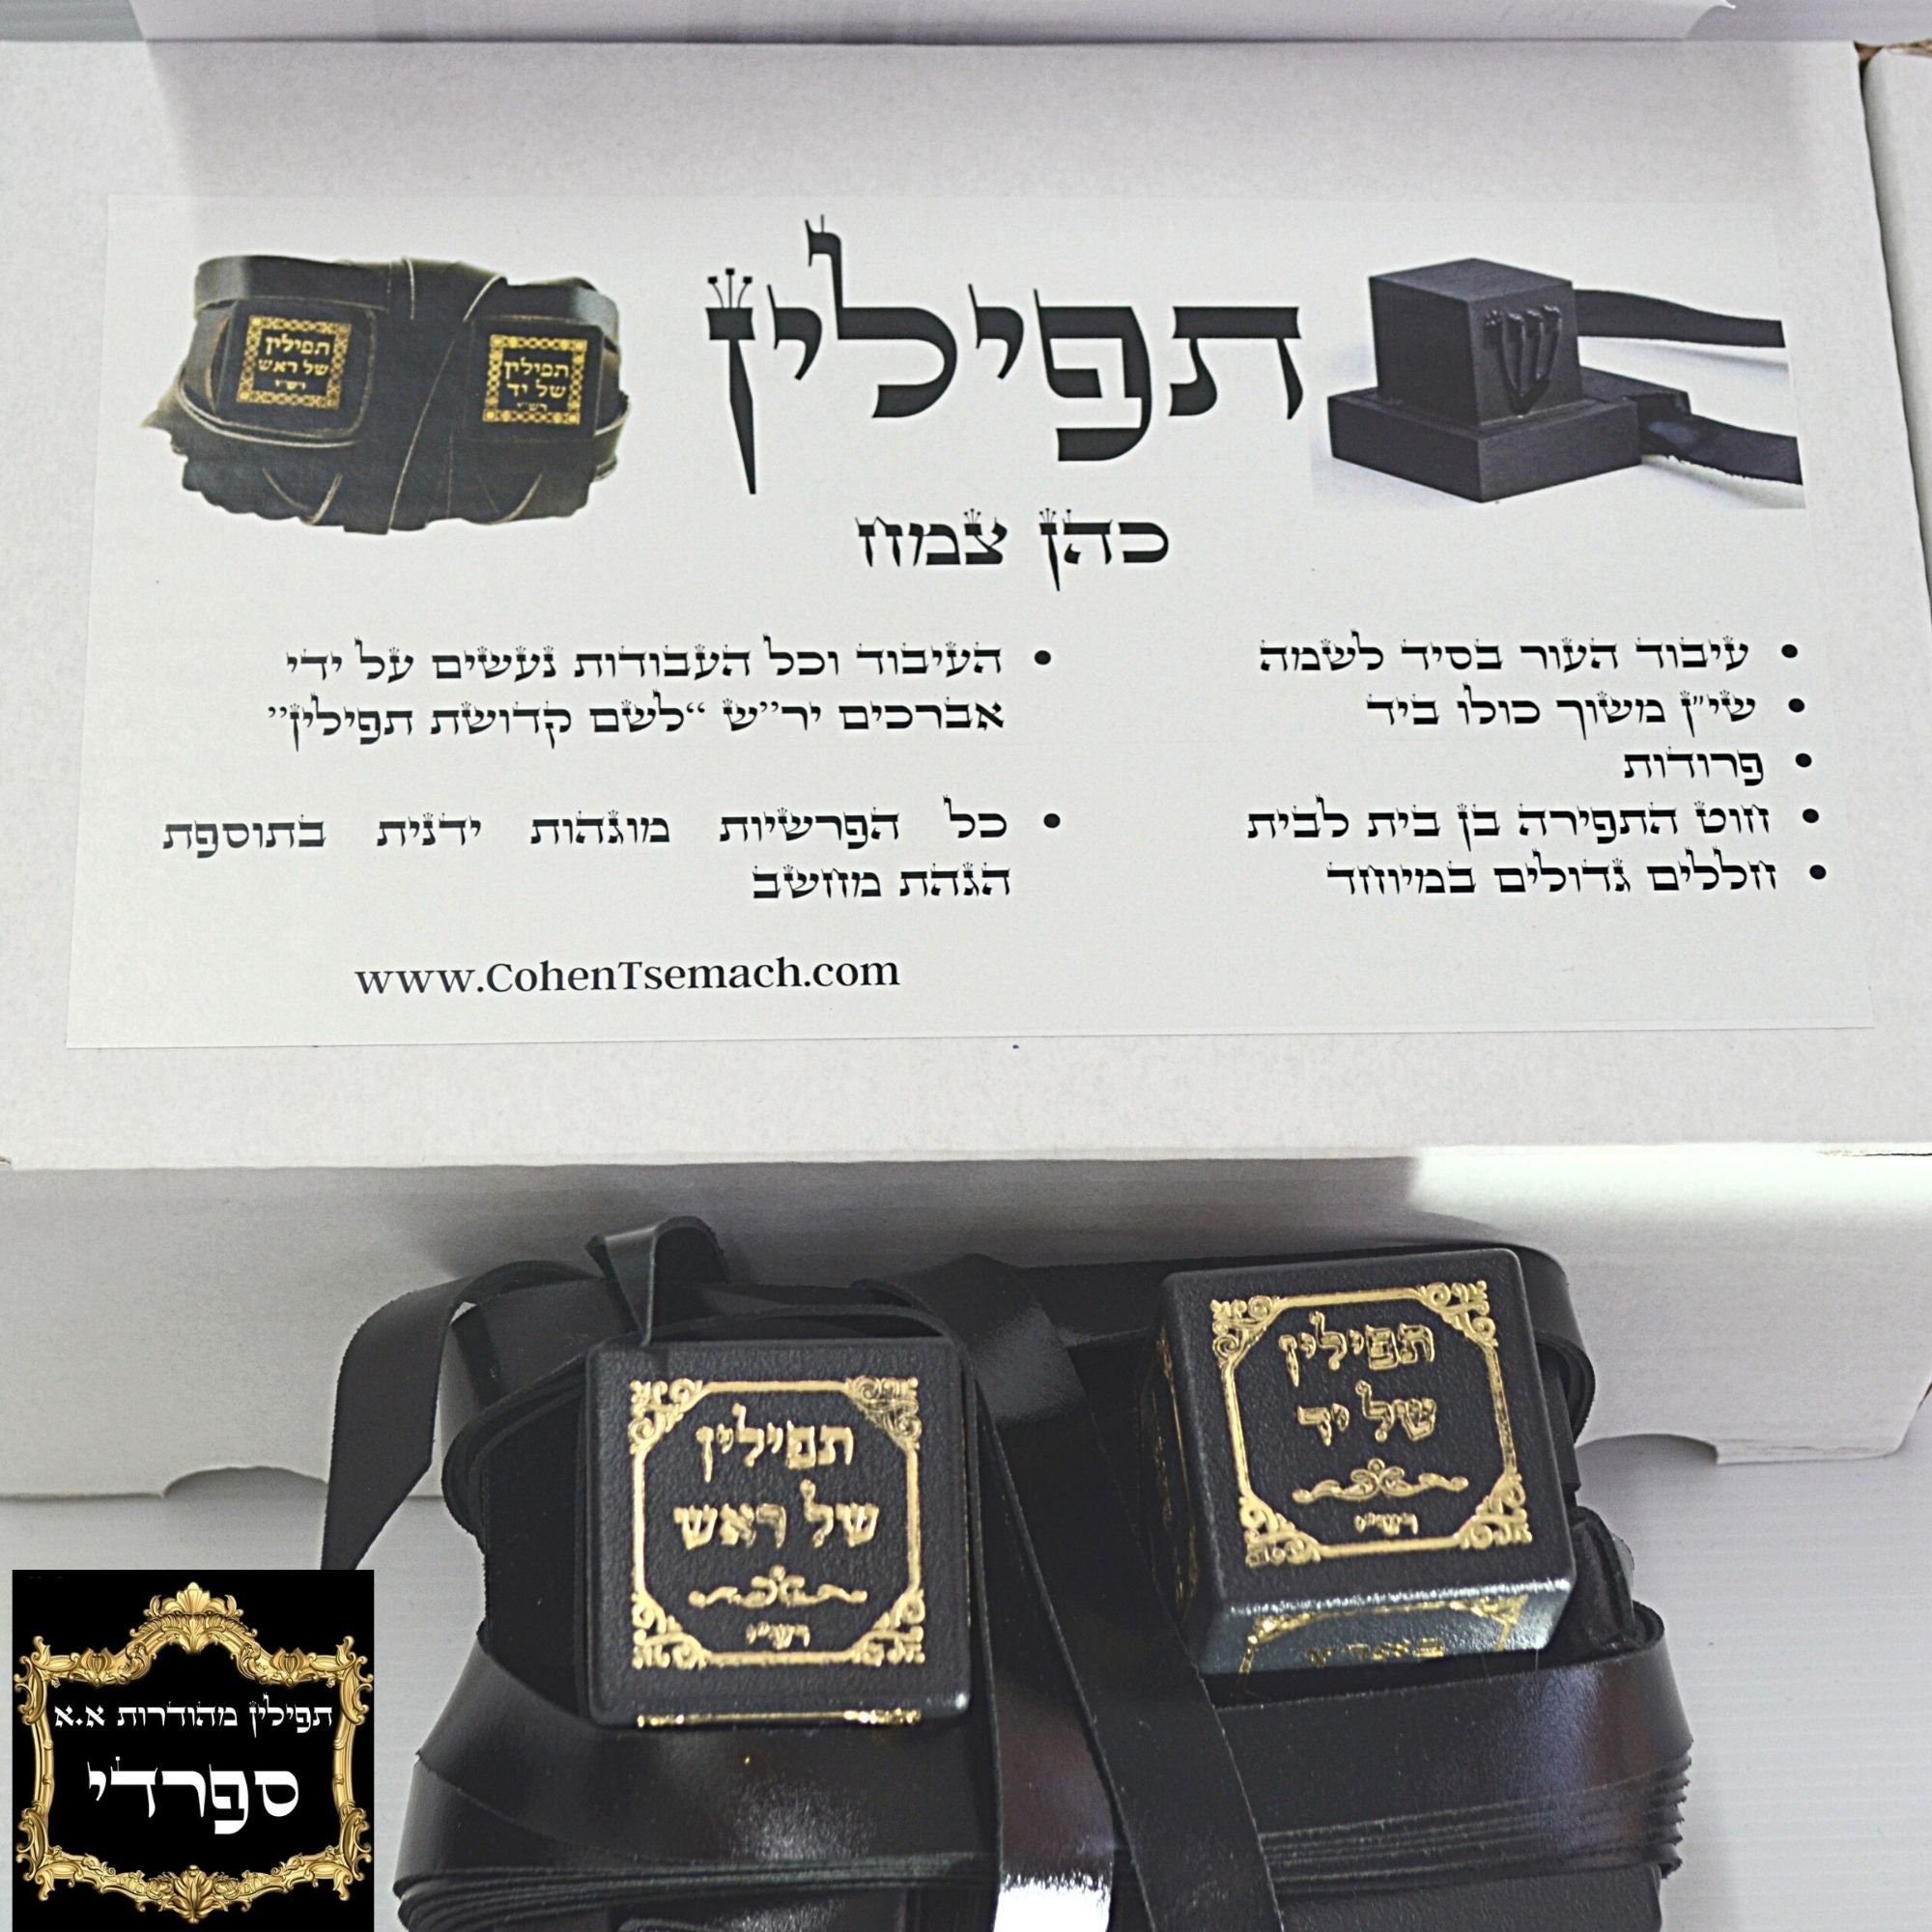 Tefillin (phylacteries), How to put on Tefillin